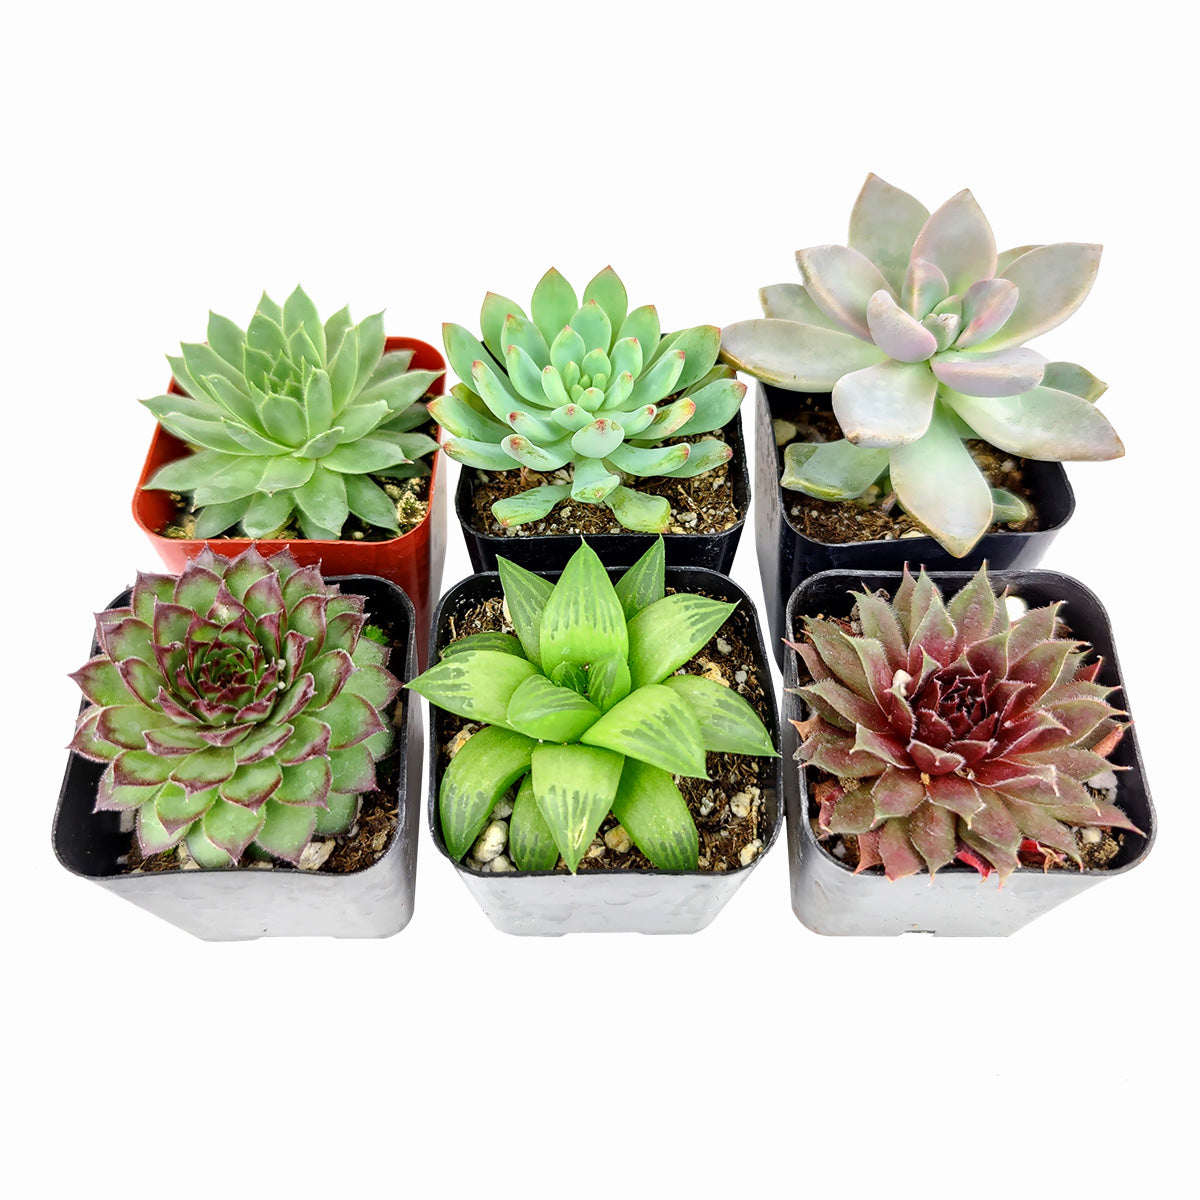 Radiant Rosette Collection of Live Succulent Plants, Hand Selected Variety Pack of Mini Succulents, Succulent Pack for Sale Online, Wedding Succulent Favors, Succulent assorted pack perfect for weddings, Types of rosette shaped succulents for wedding